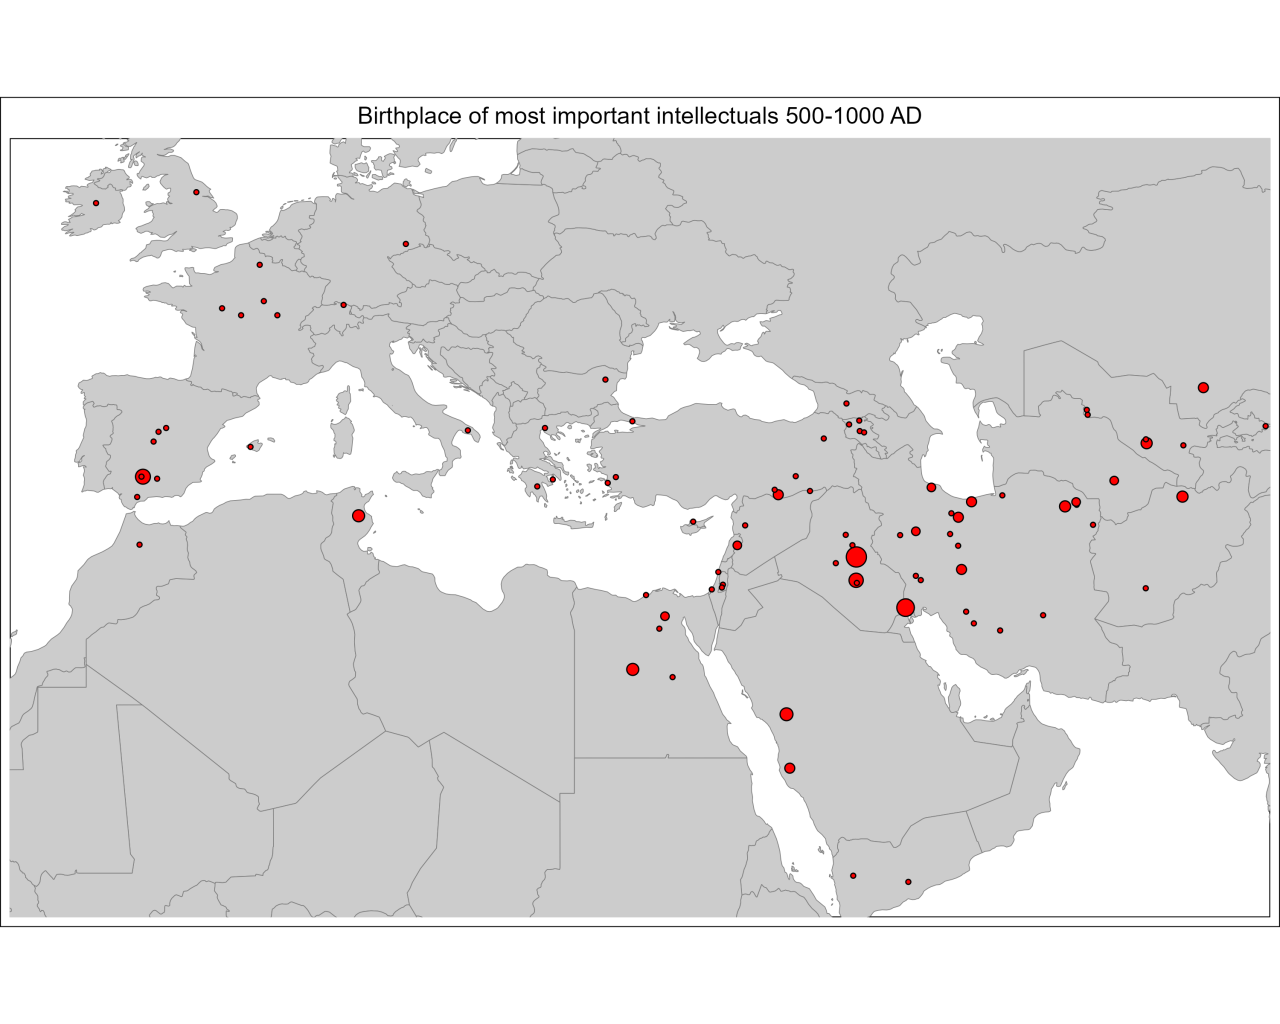 Birthplaces of most notable intellectuals during the period 500-1000 AD
Other time periods >
by kristiani95
[[MORE]] The map was created by using this dataset: https://www.nature.com/articles/s41597-022-01369-4. Itcontains over 2 million Wikipedia...